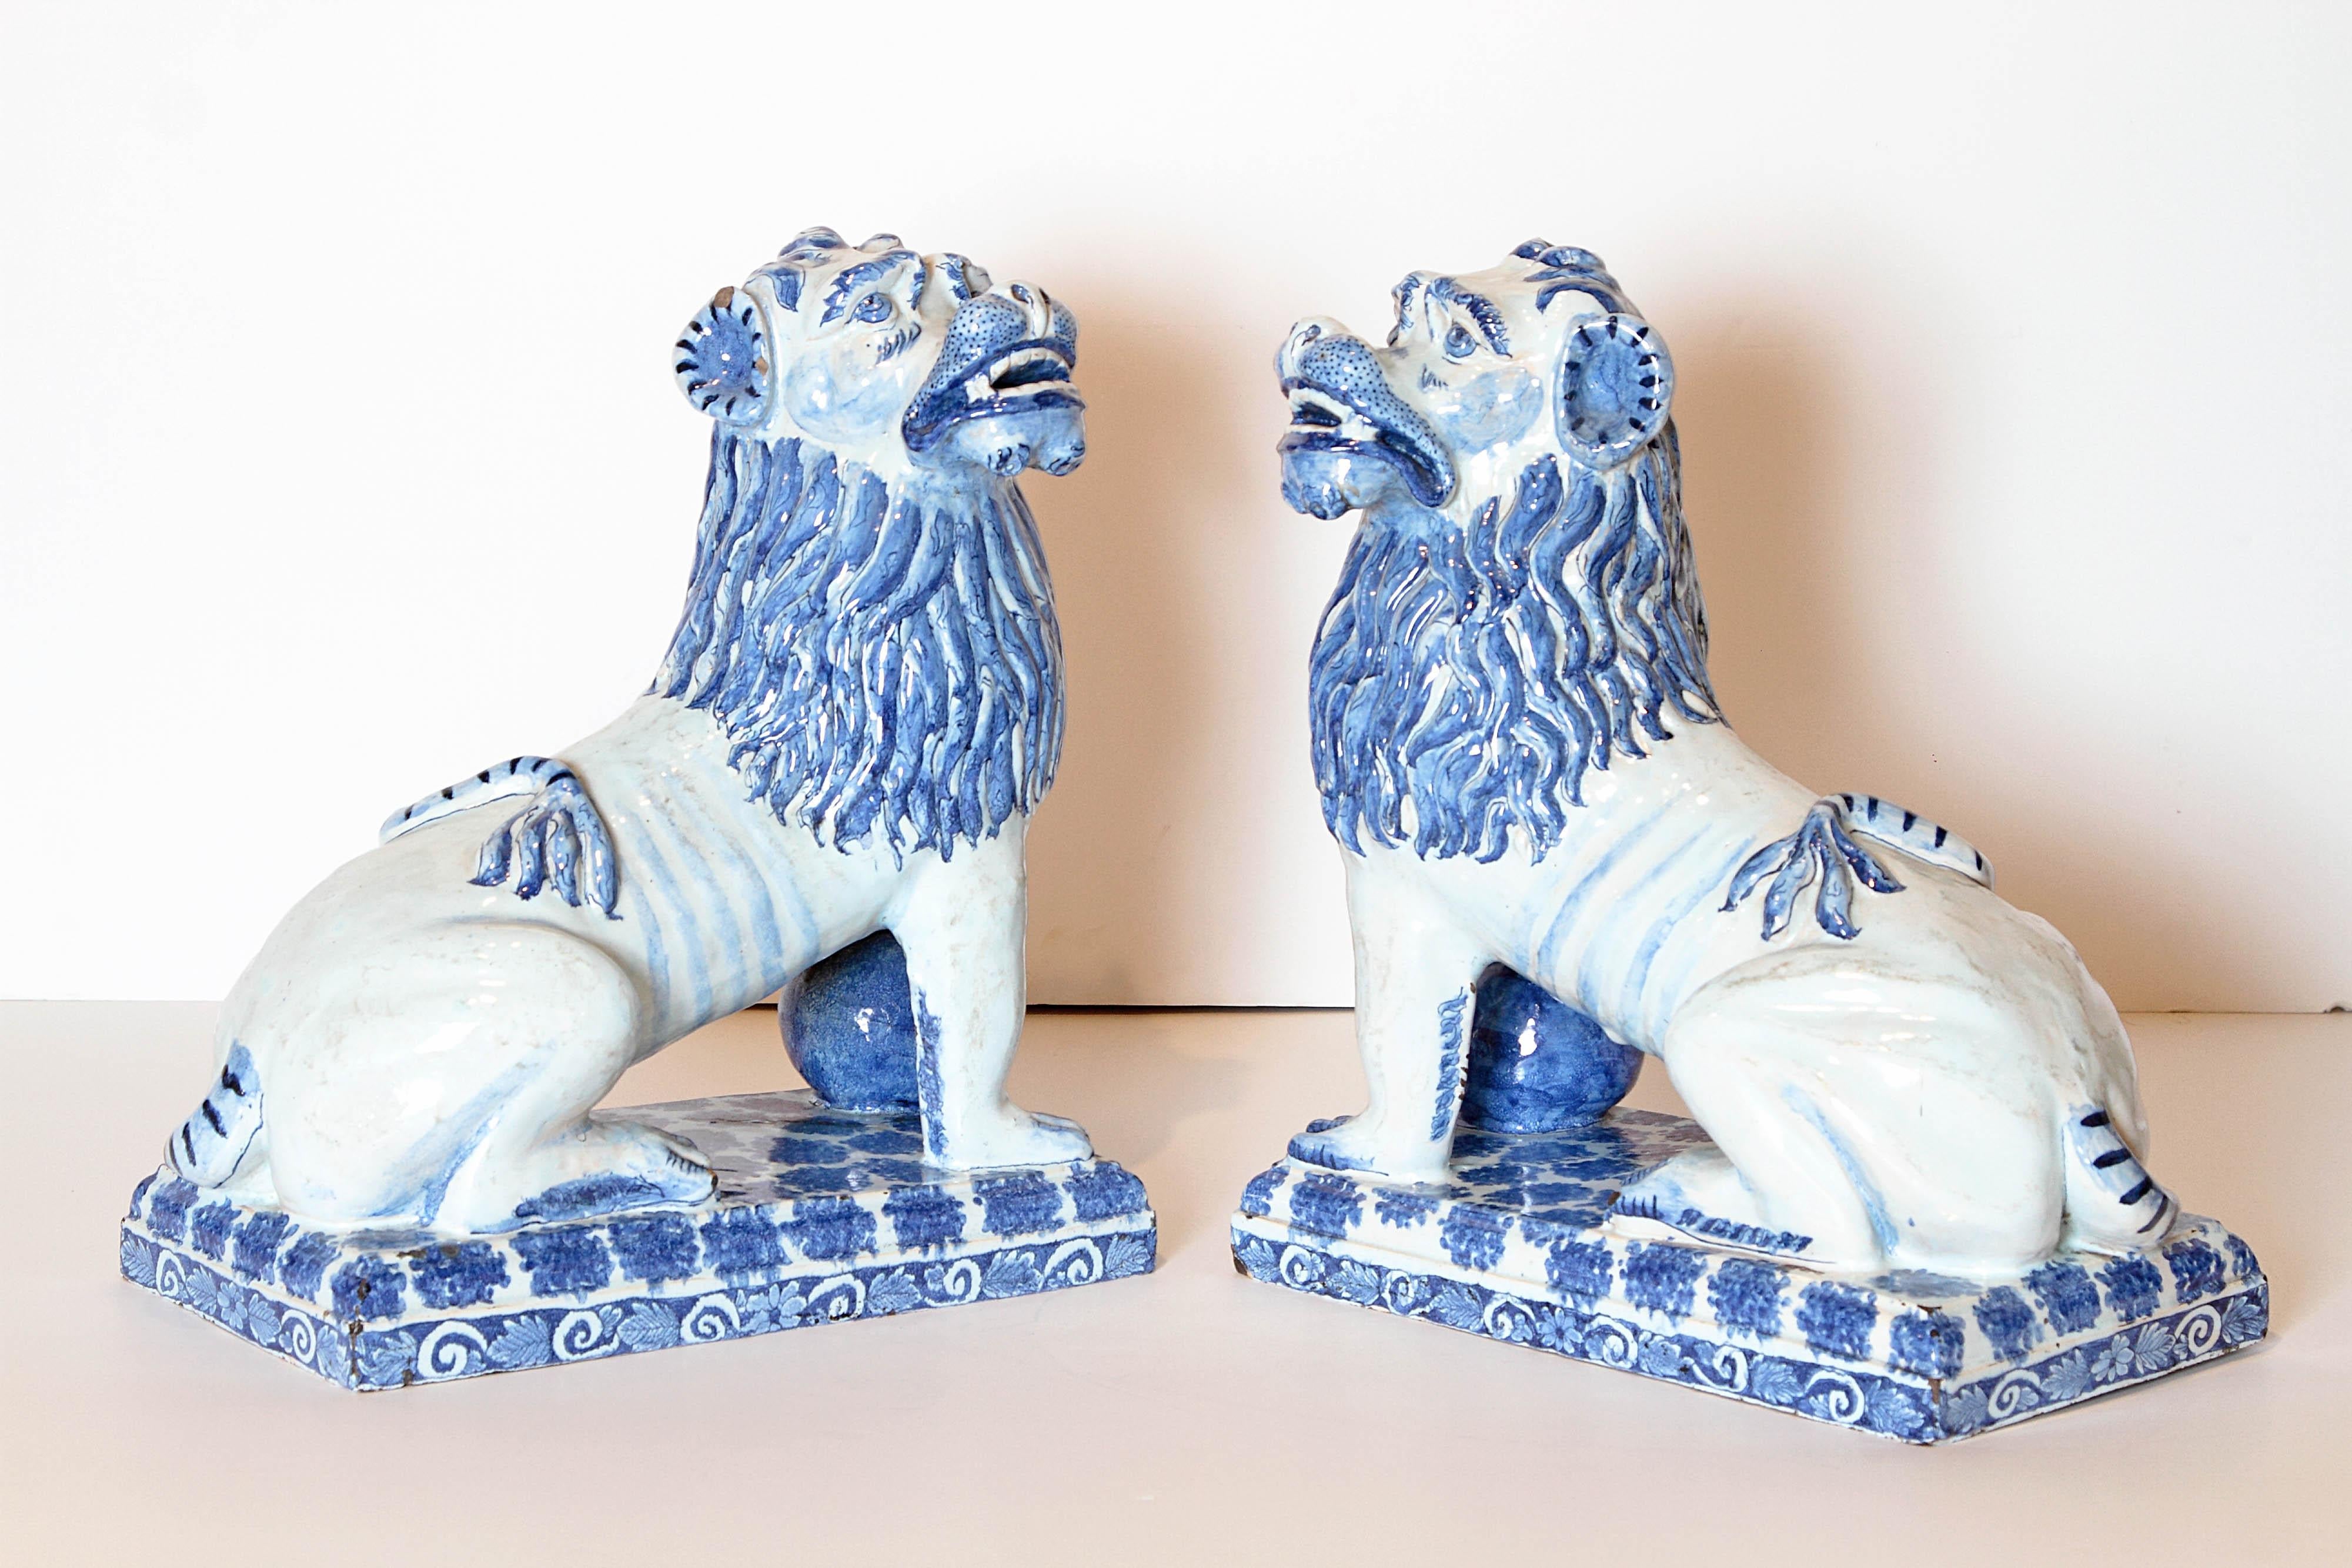 A pair of French faience lions in blue monochrome. Each lion is seated and looking to one side on a rectangular base with great attention to detailing of the manes, ears and snarling faces. Formerly museum owned. One figure has an old staple repair.